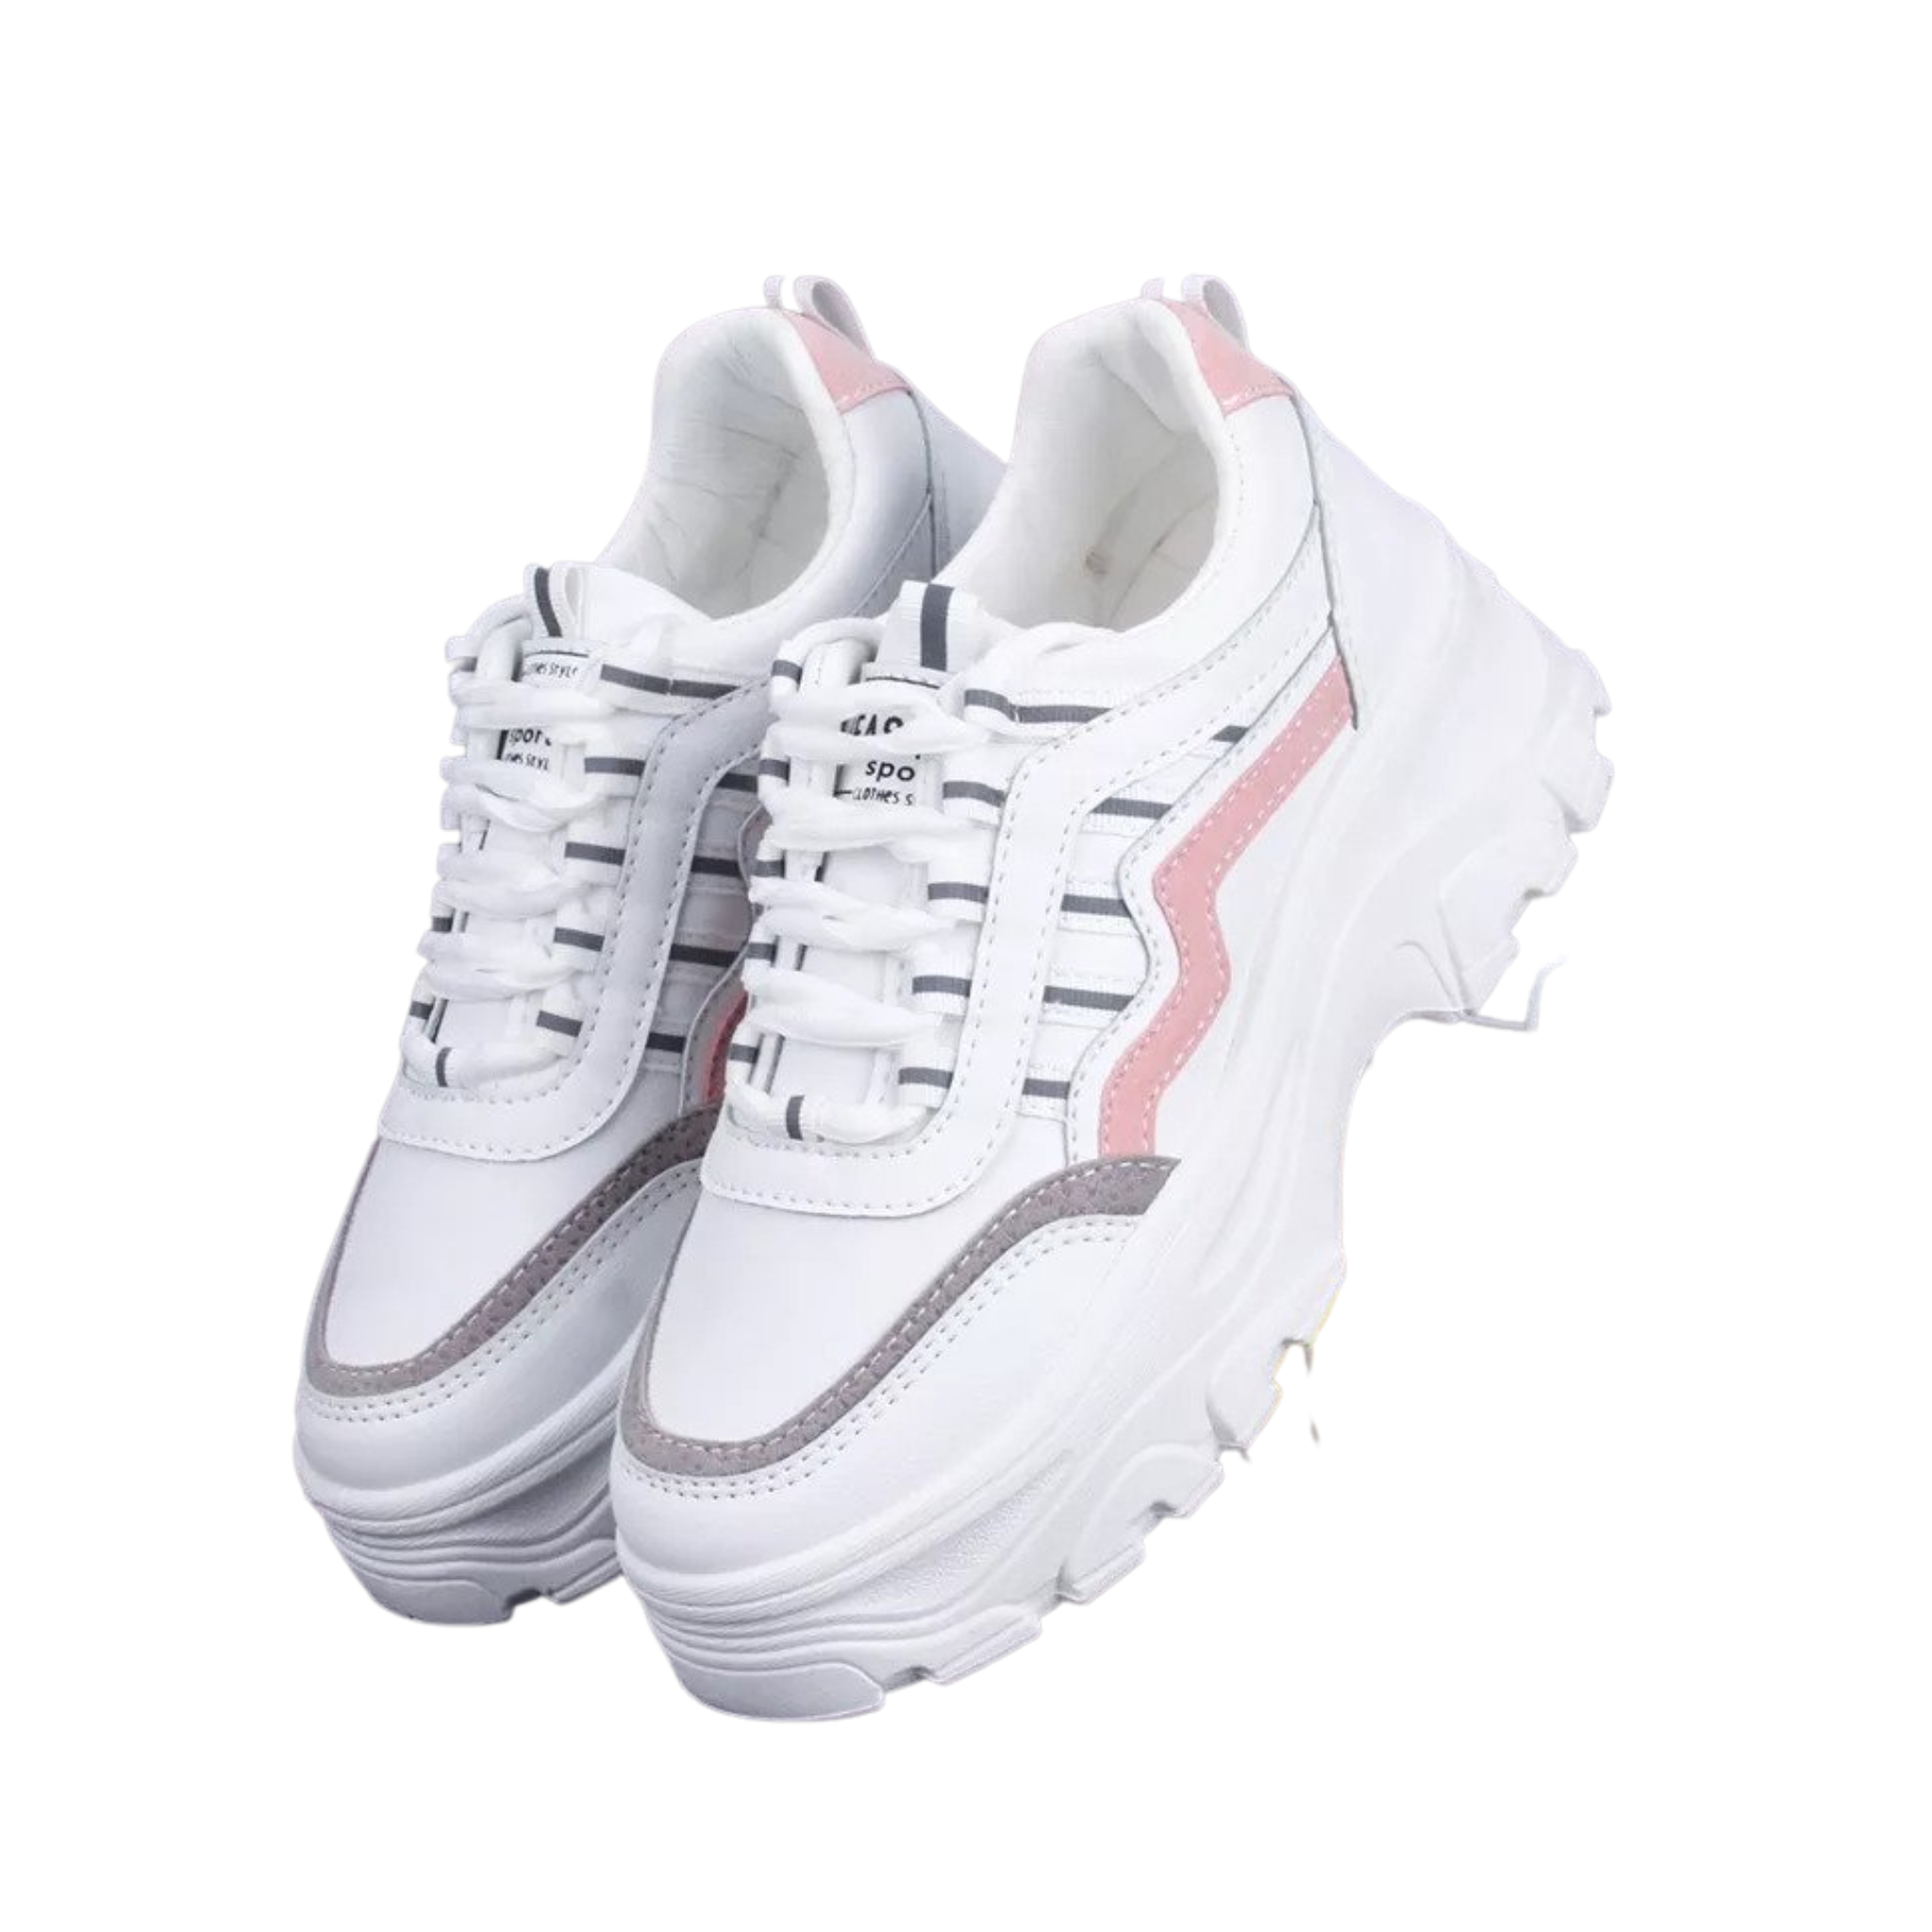 Sports Shoes, High Top Warm & Casual Winter Shoes, for Women